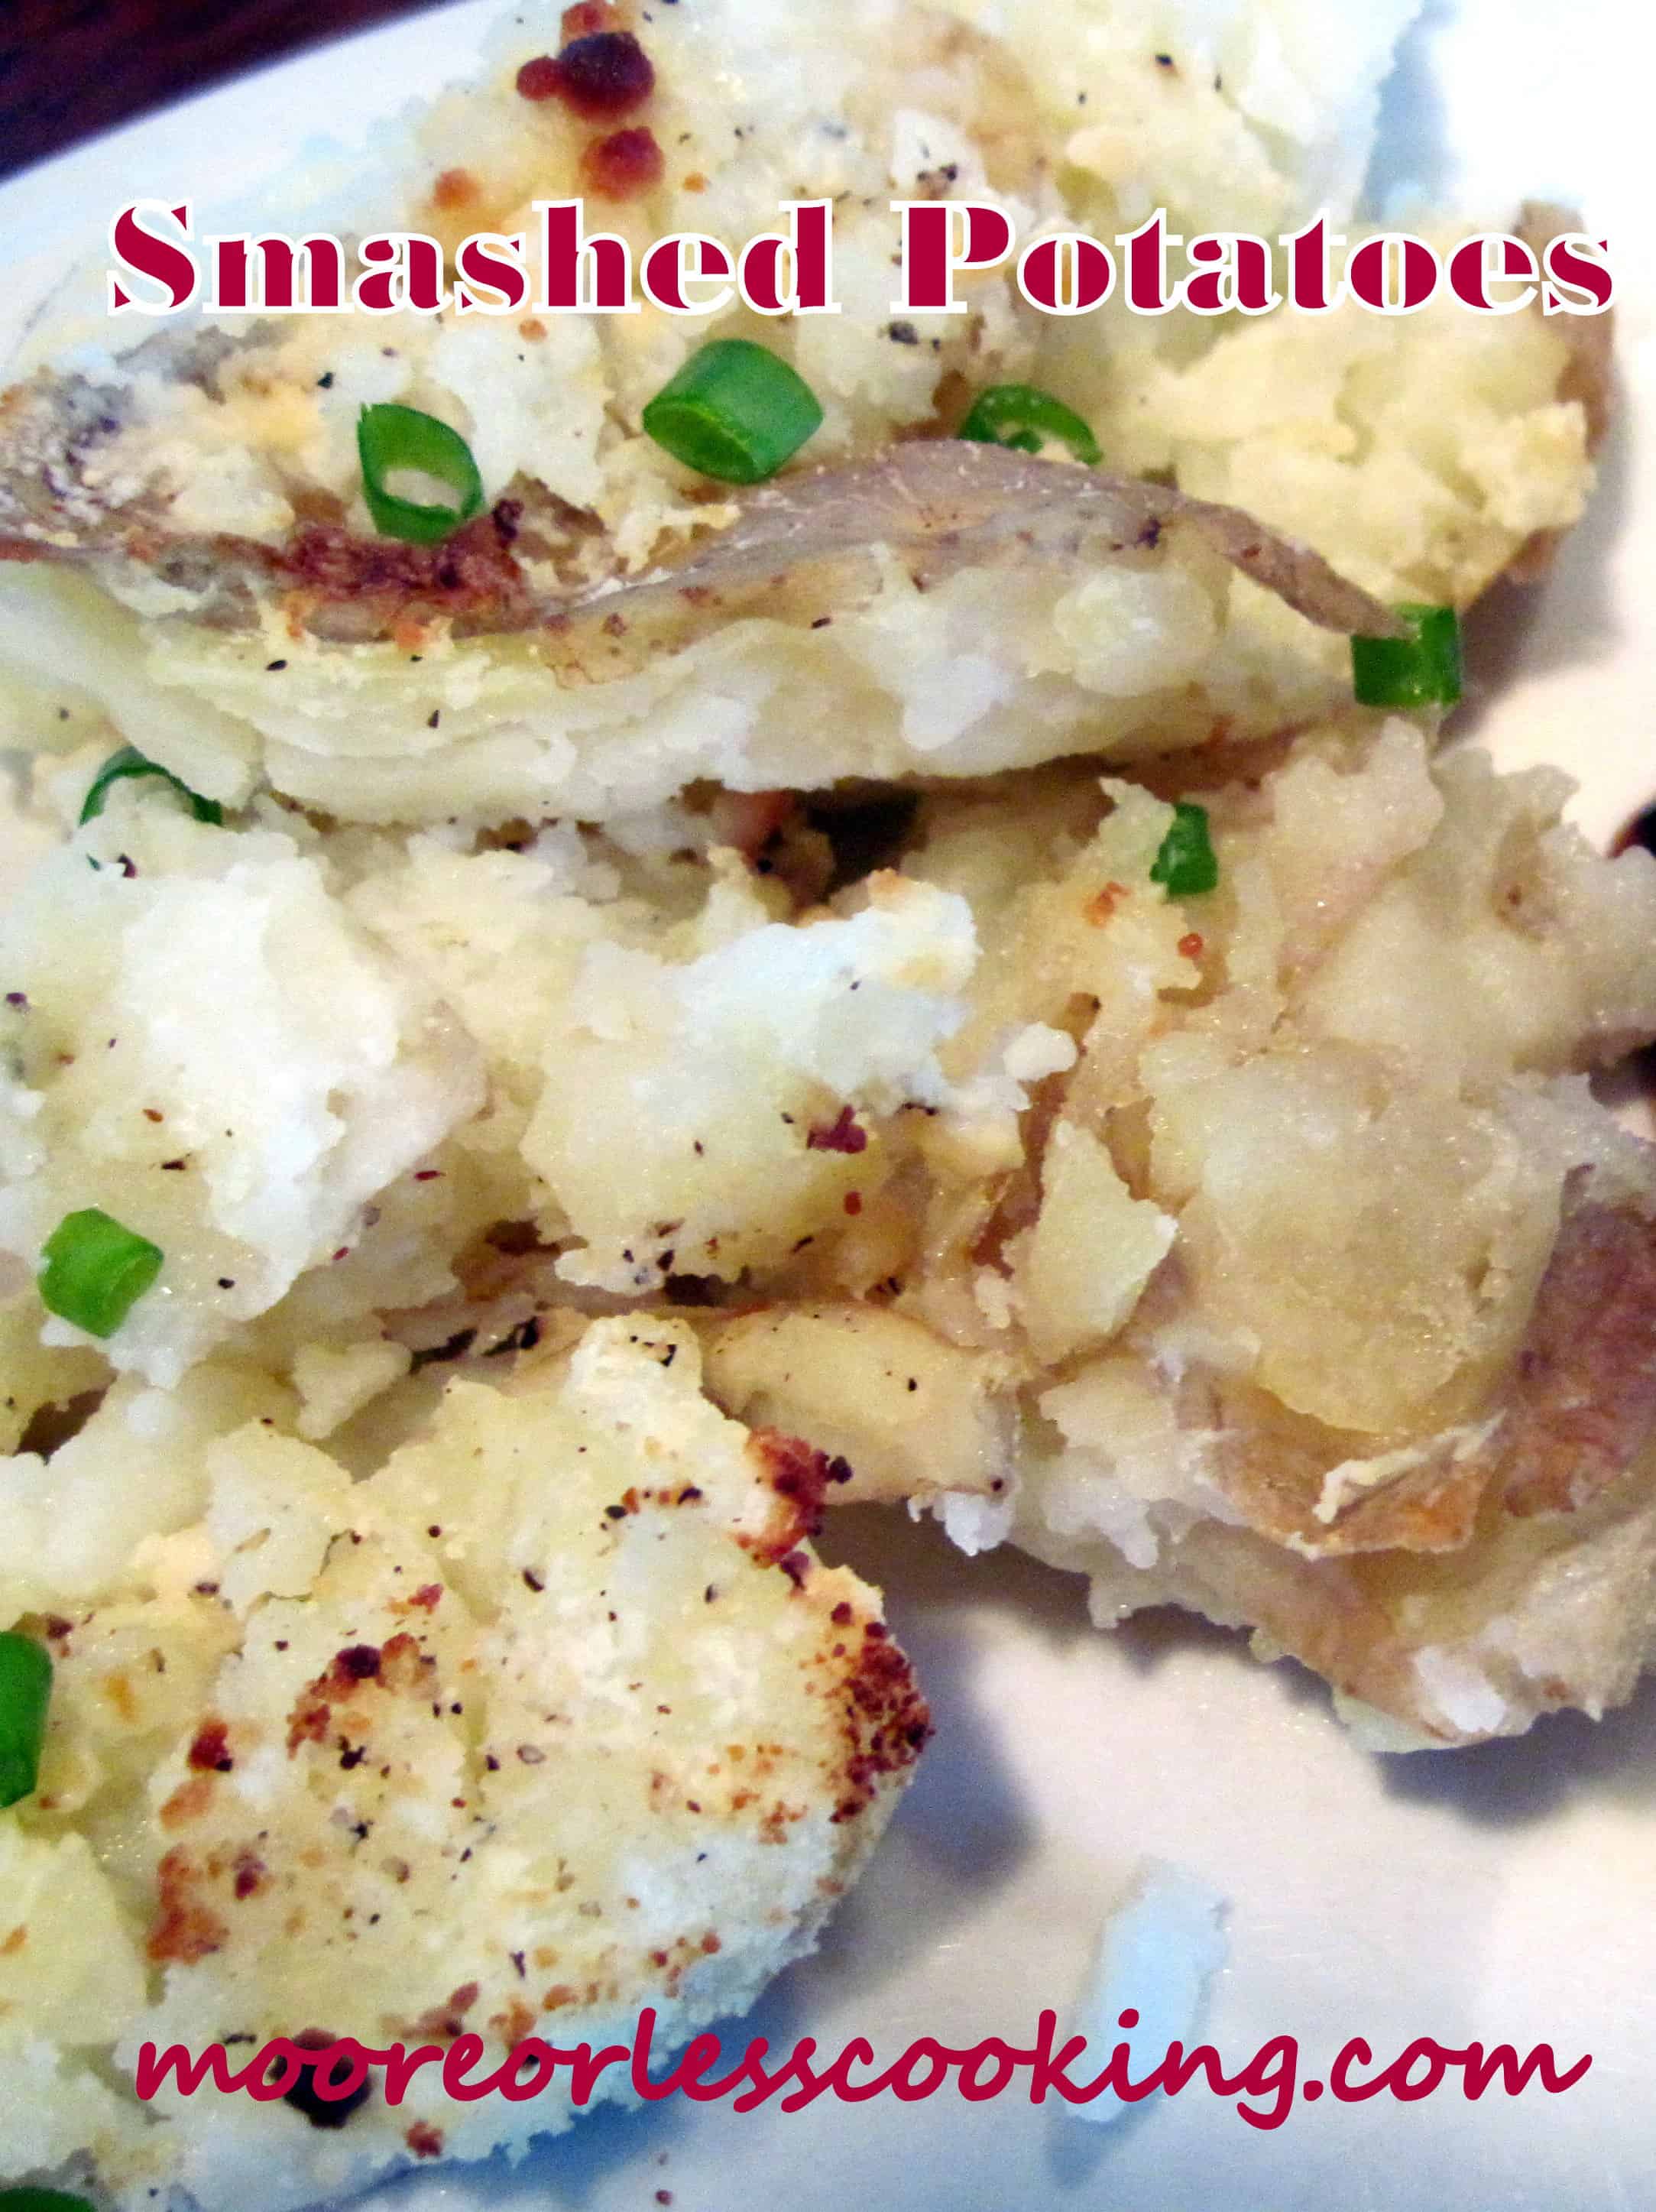 Smashed Potatoes and an Advent Wish For Karen from Baking in a Tornado Blog!!